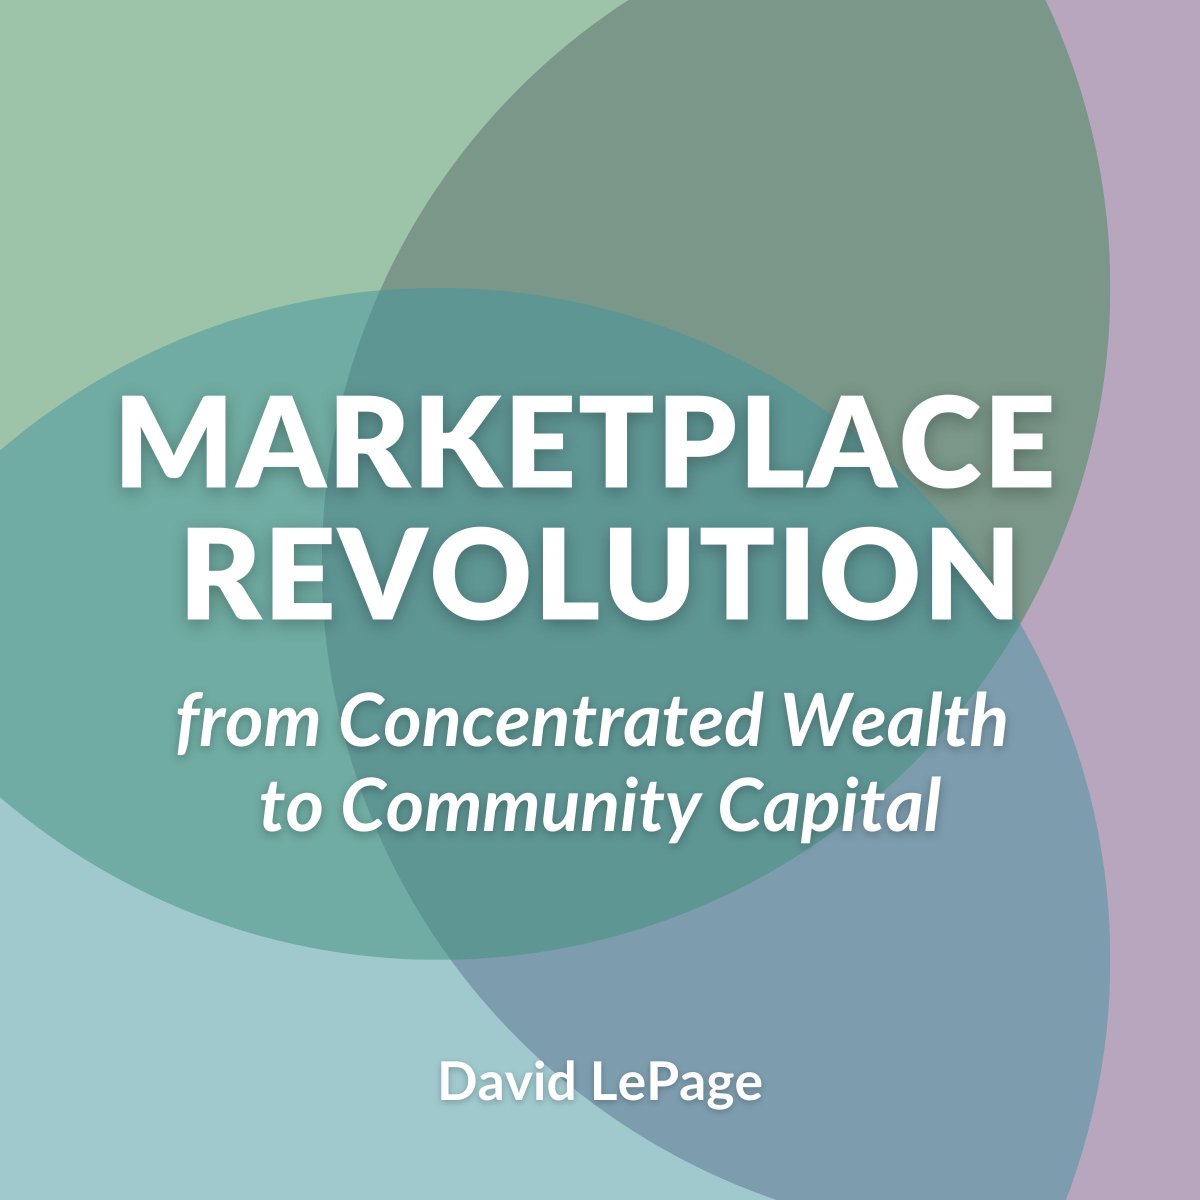 “This book is destined to become the ‘how to’ handbook for those of us looking to create social impact through procurement.” - David Upton, Former CEO @commongood4all Get #MarketplaceRevolution now: Our website: buff.ly/3hvvahI Amazon: buff.ly/49DwGXW